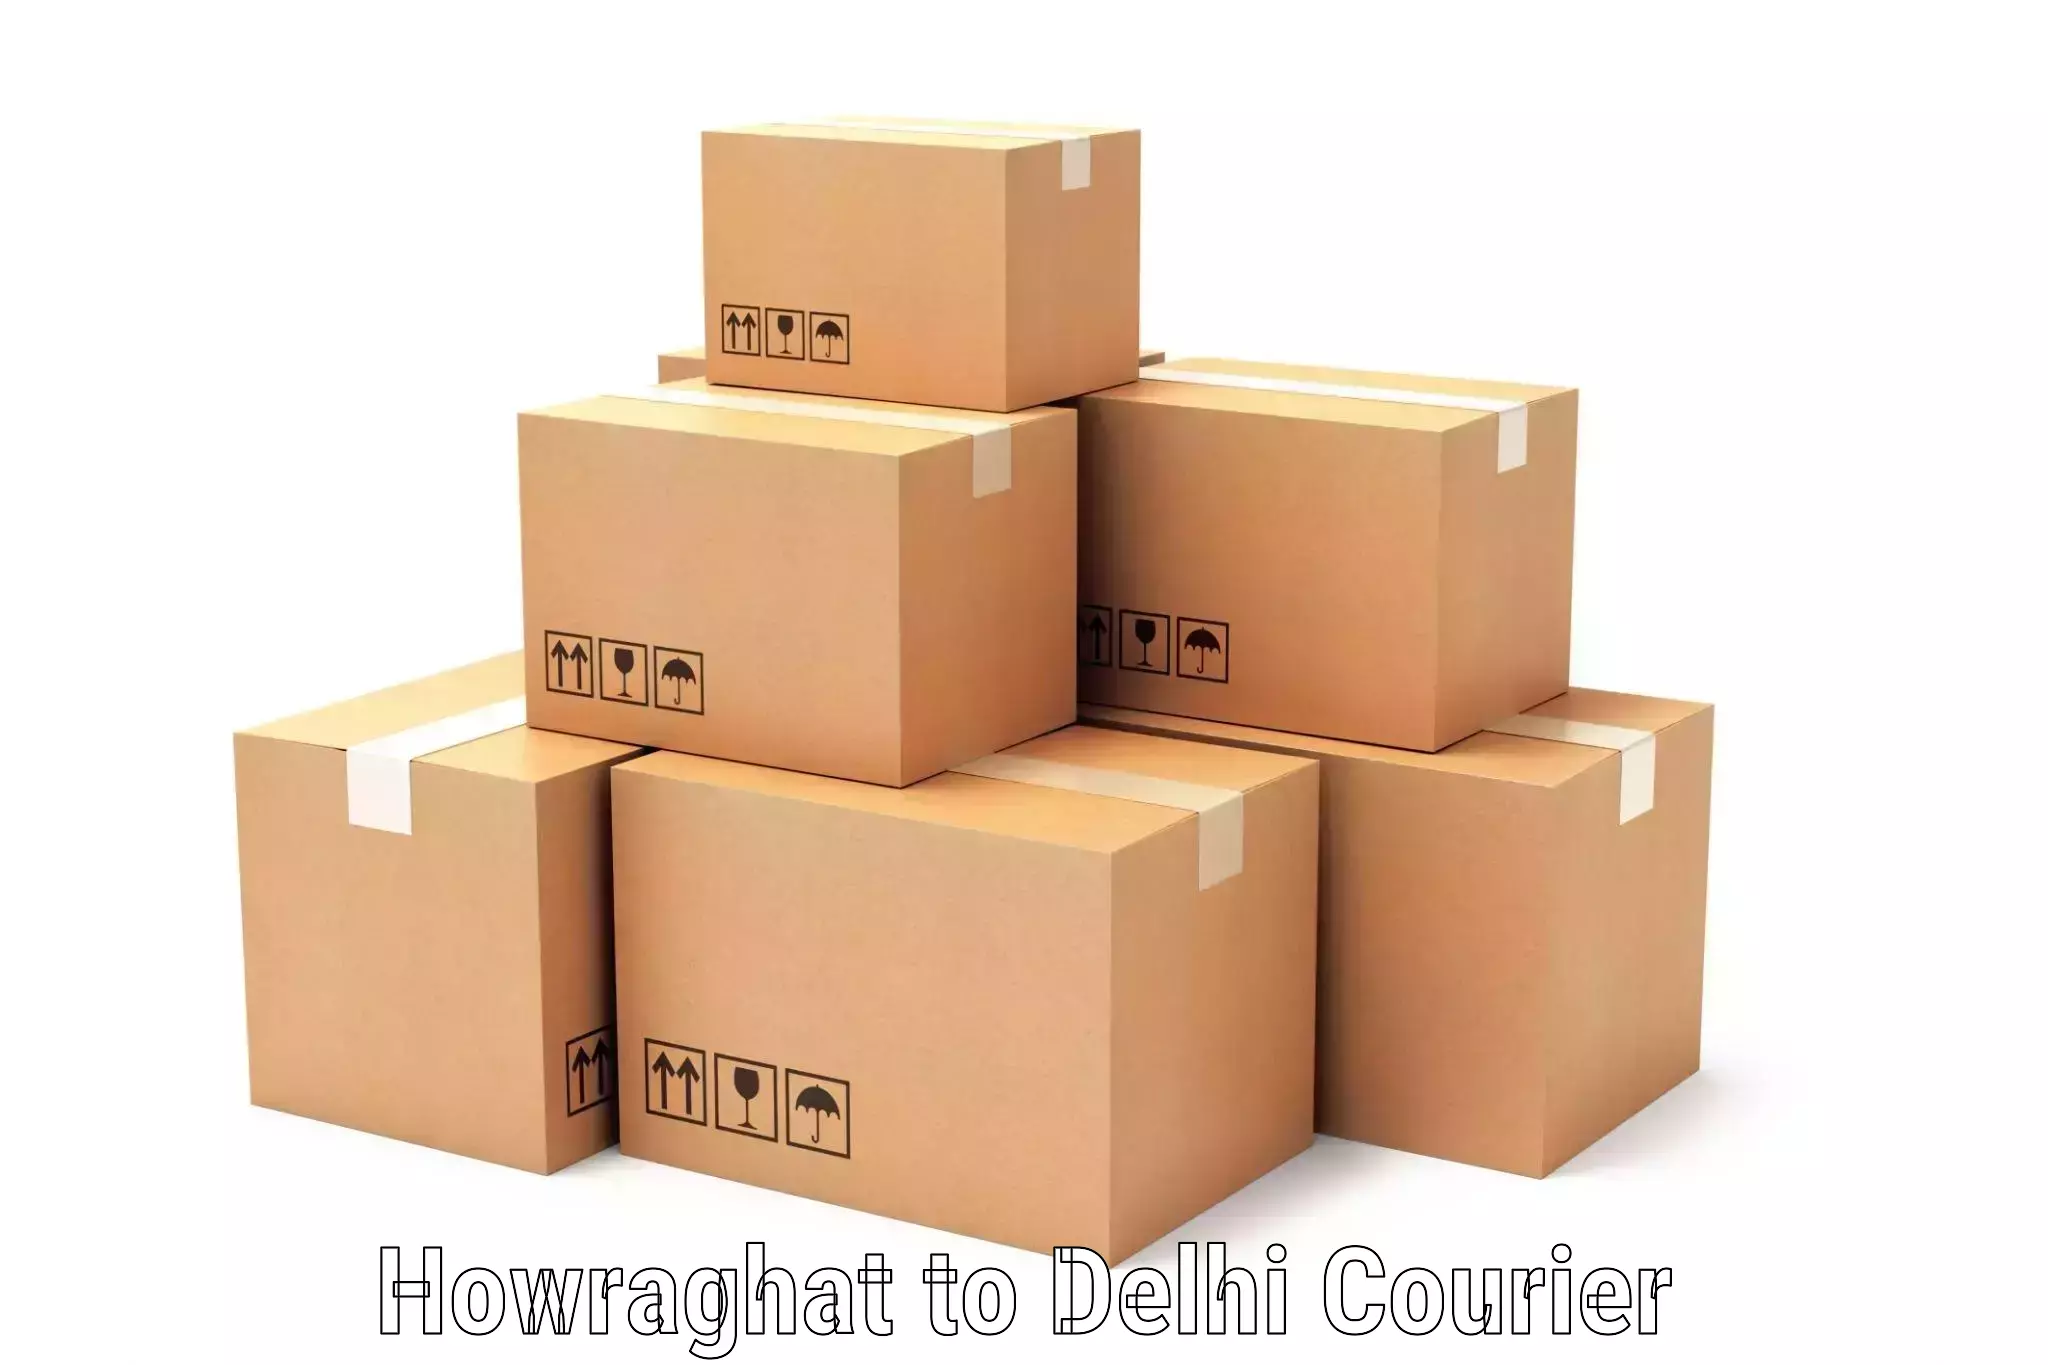 Quick courier services Howraghat to Jawaharlal Nehru University New Delhi